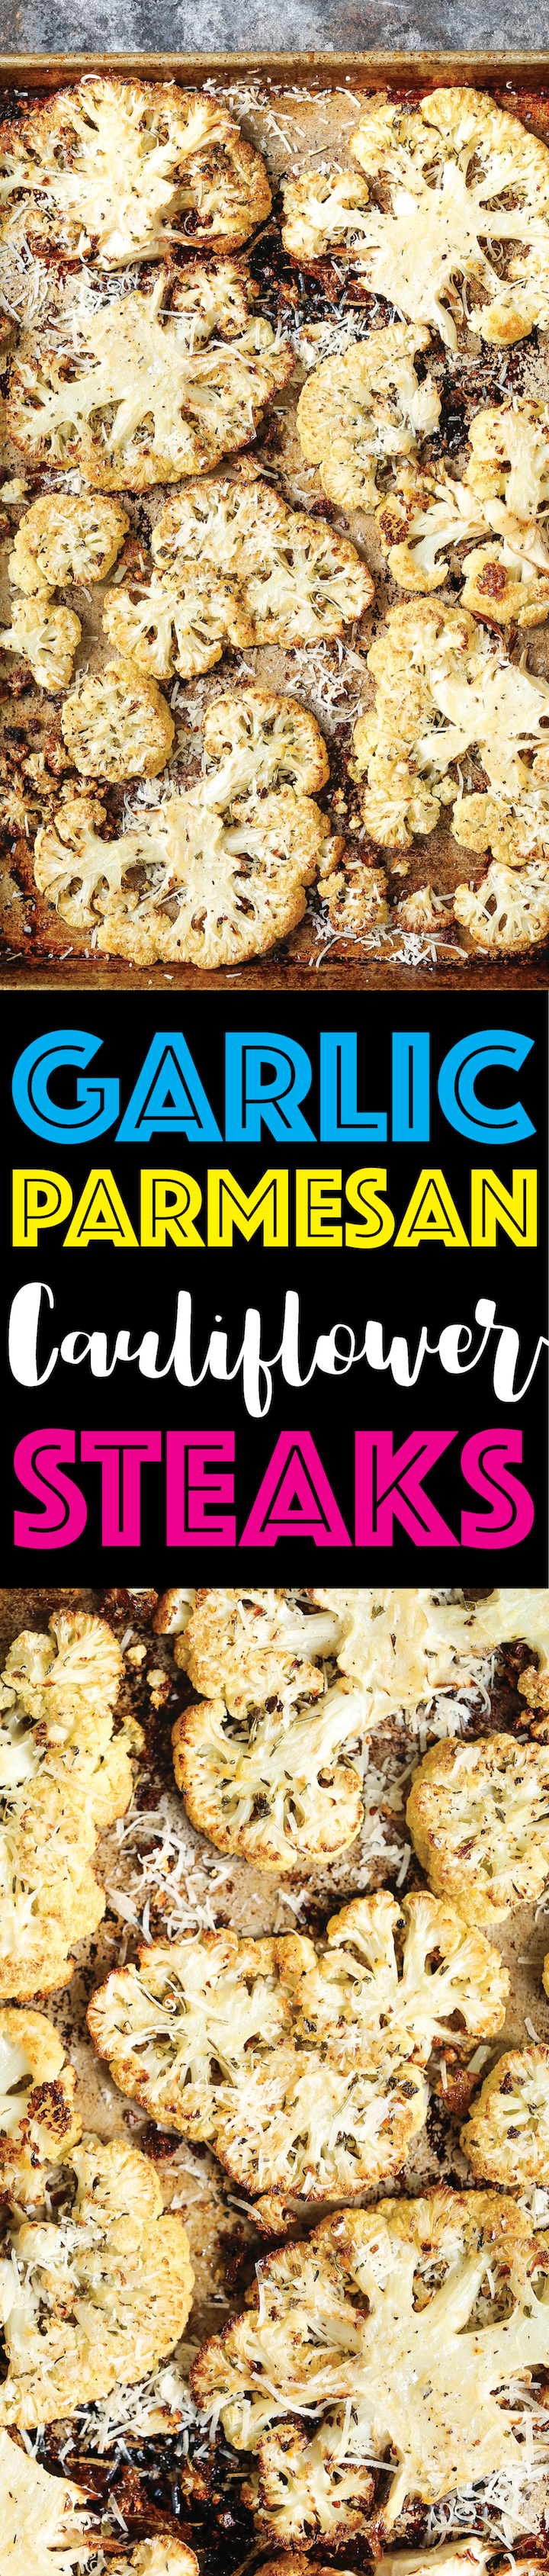 Garlic Parmesan Cauliflower Steaks - Your new go-to side dish! Roasted cauliflower is the best/easiest way to go! So crisp-tender and perfectly seasoned!